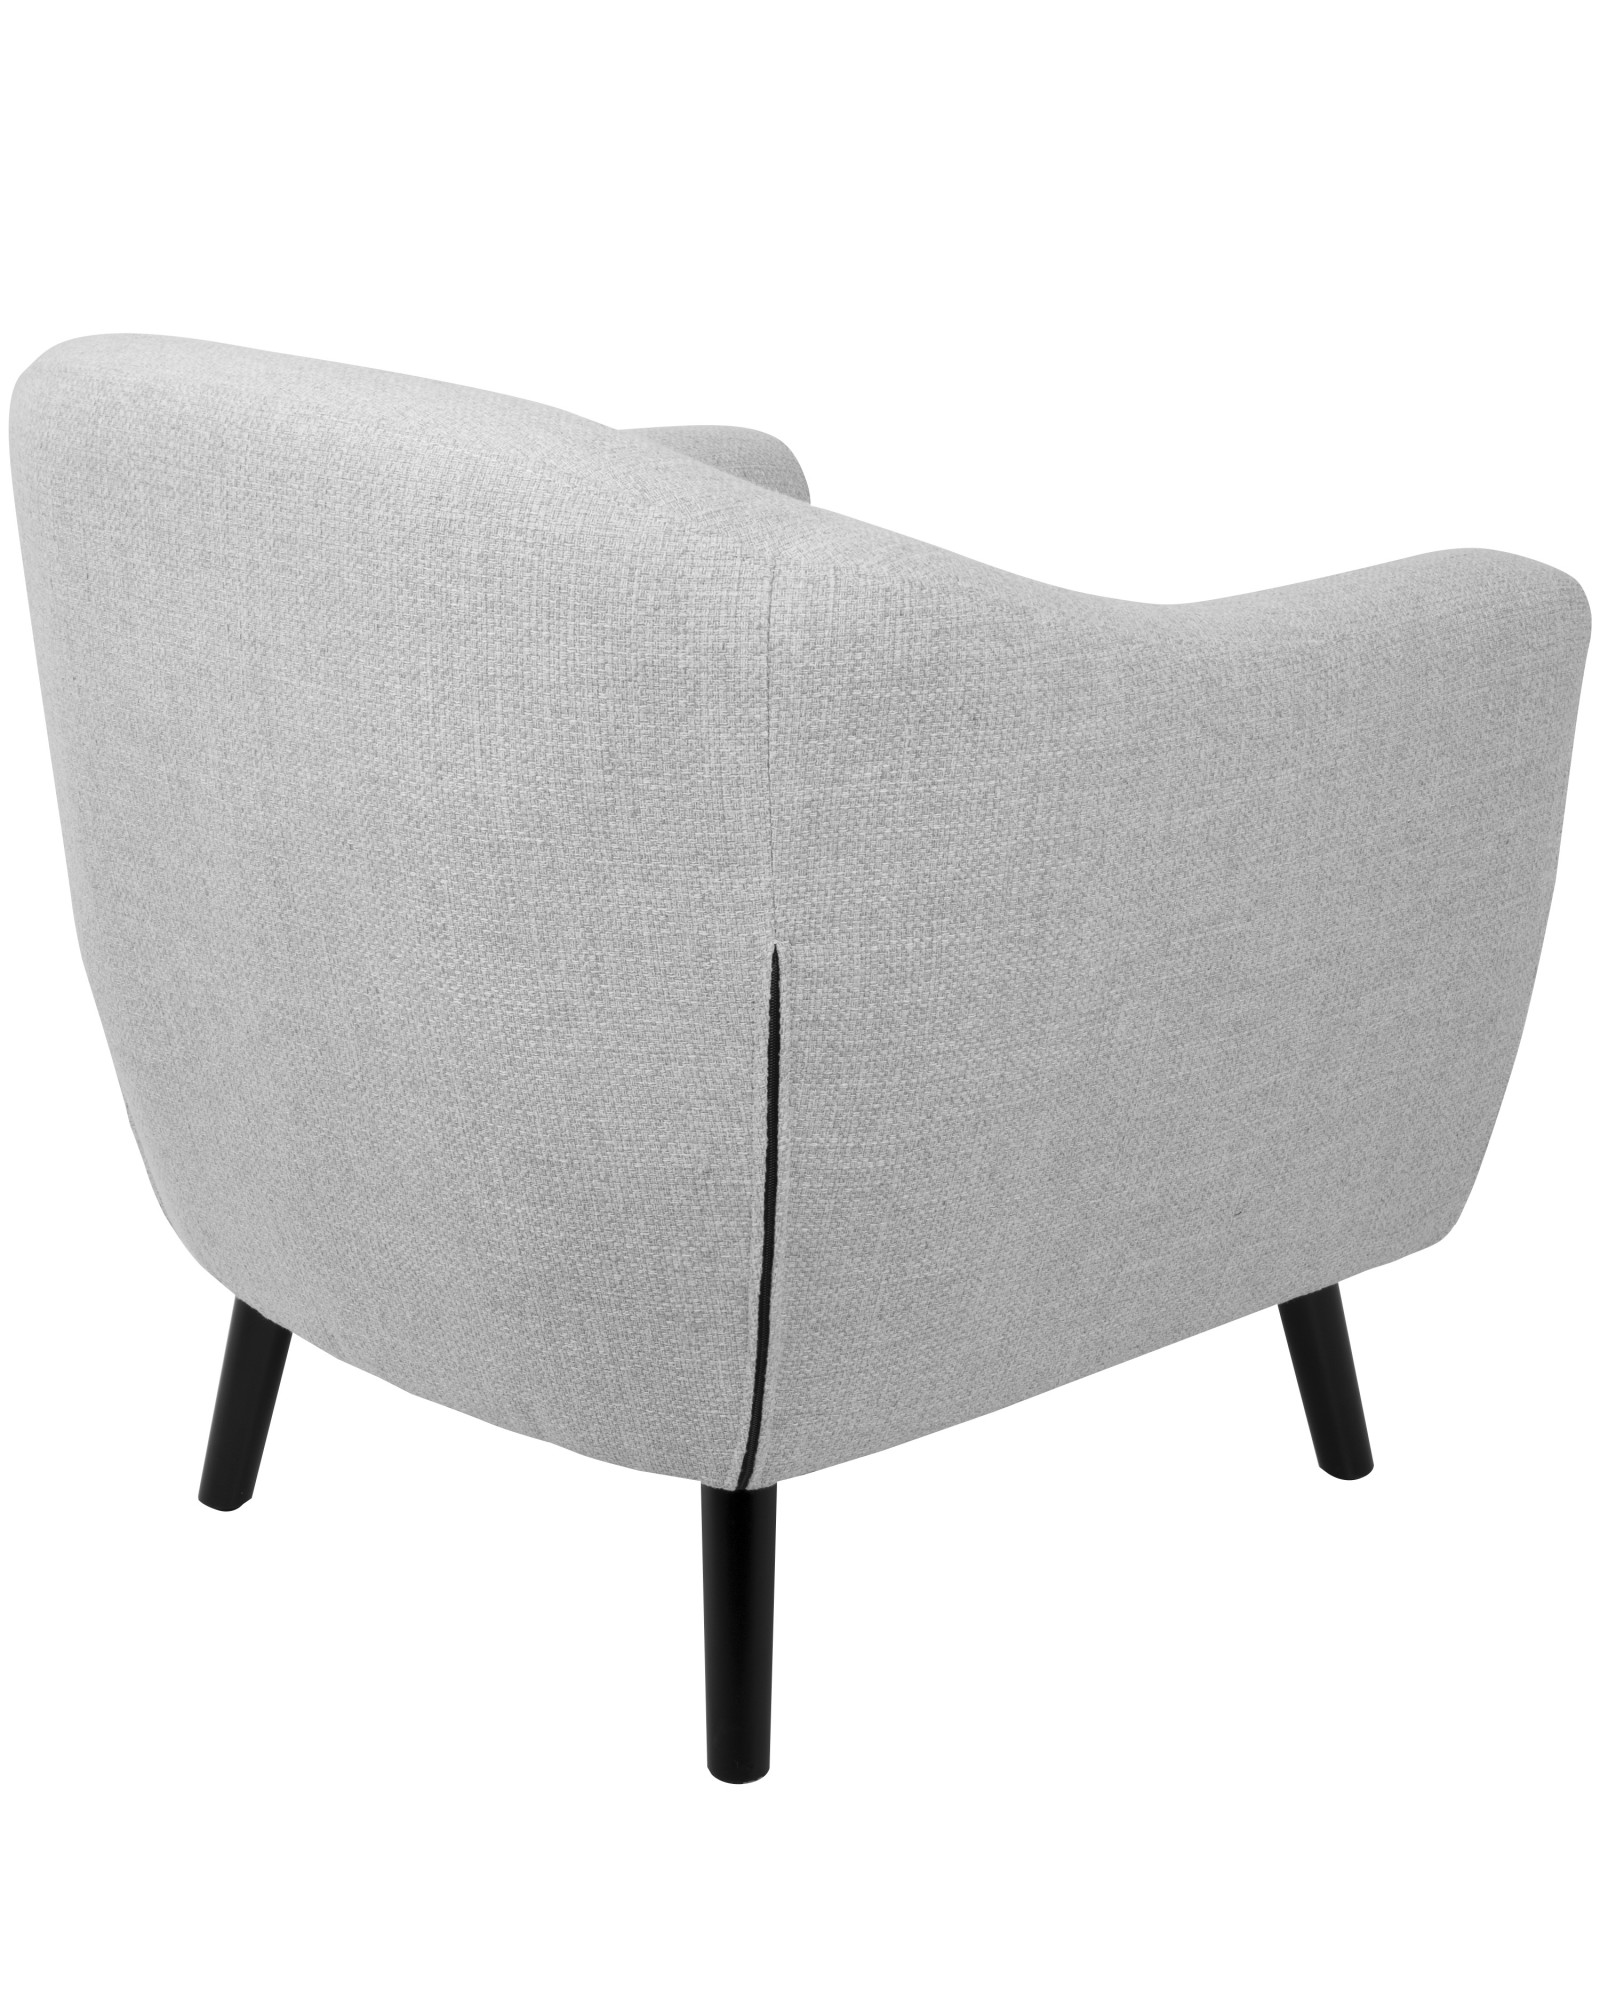 Rockwell Mid-Century Modern Accent Chair with Noise Fabric in Light Grey